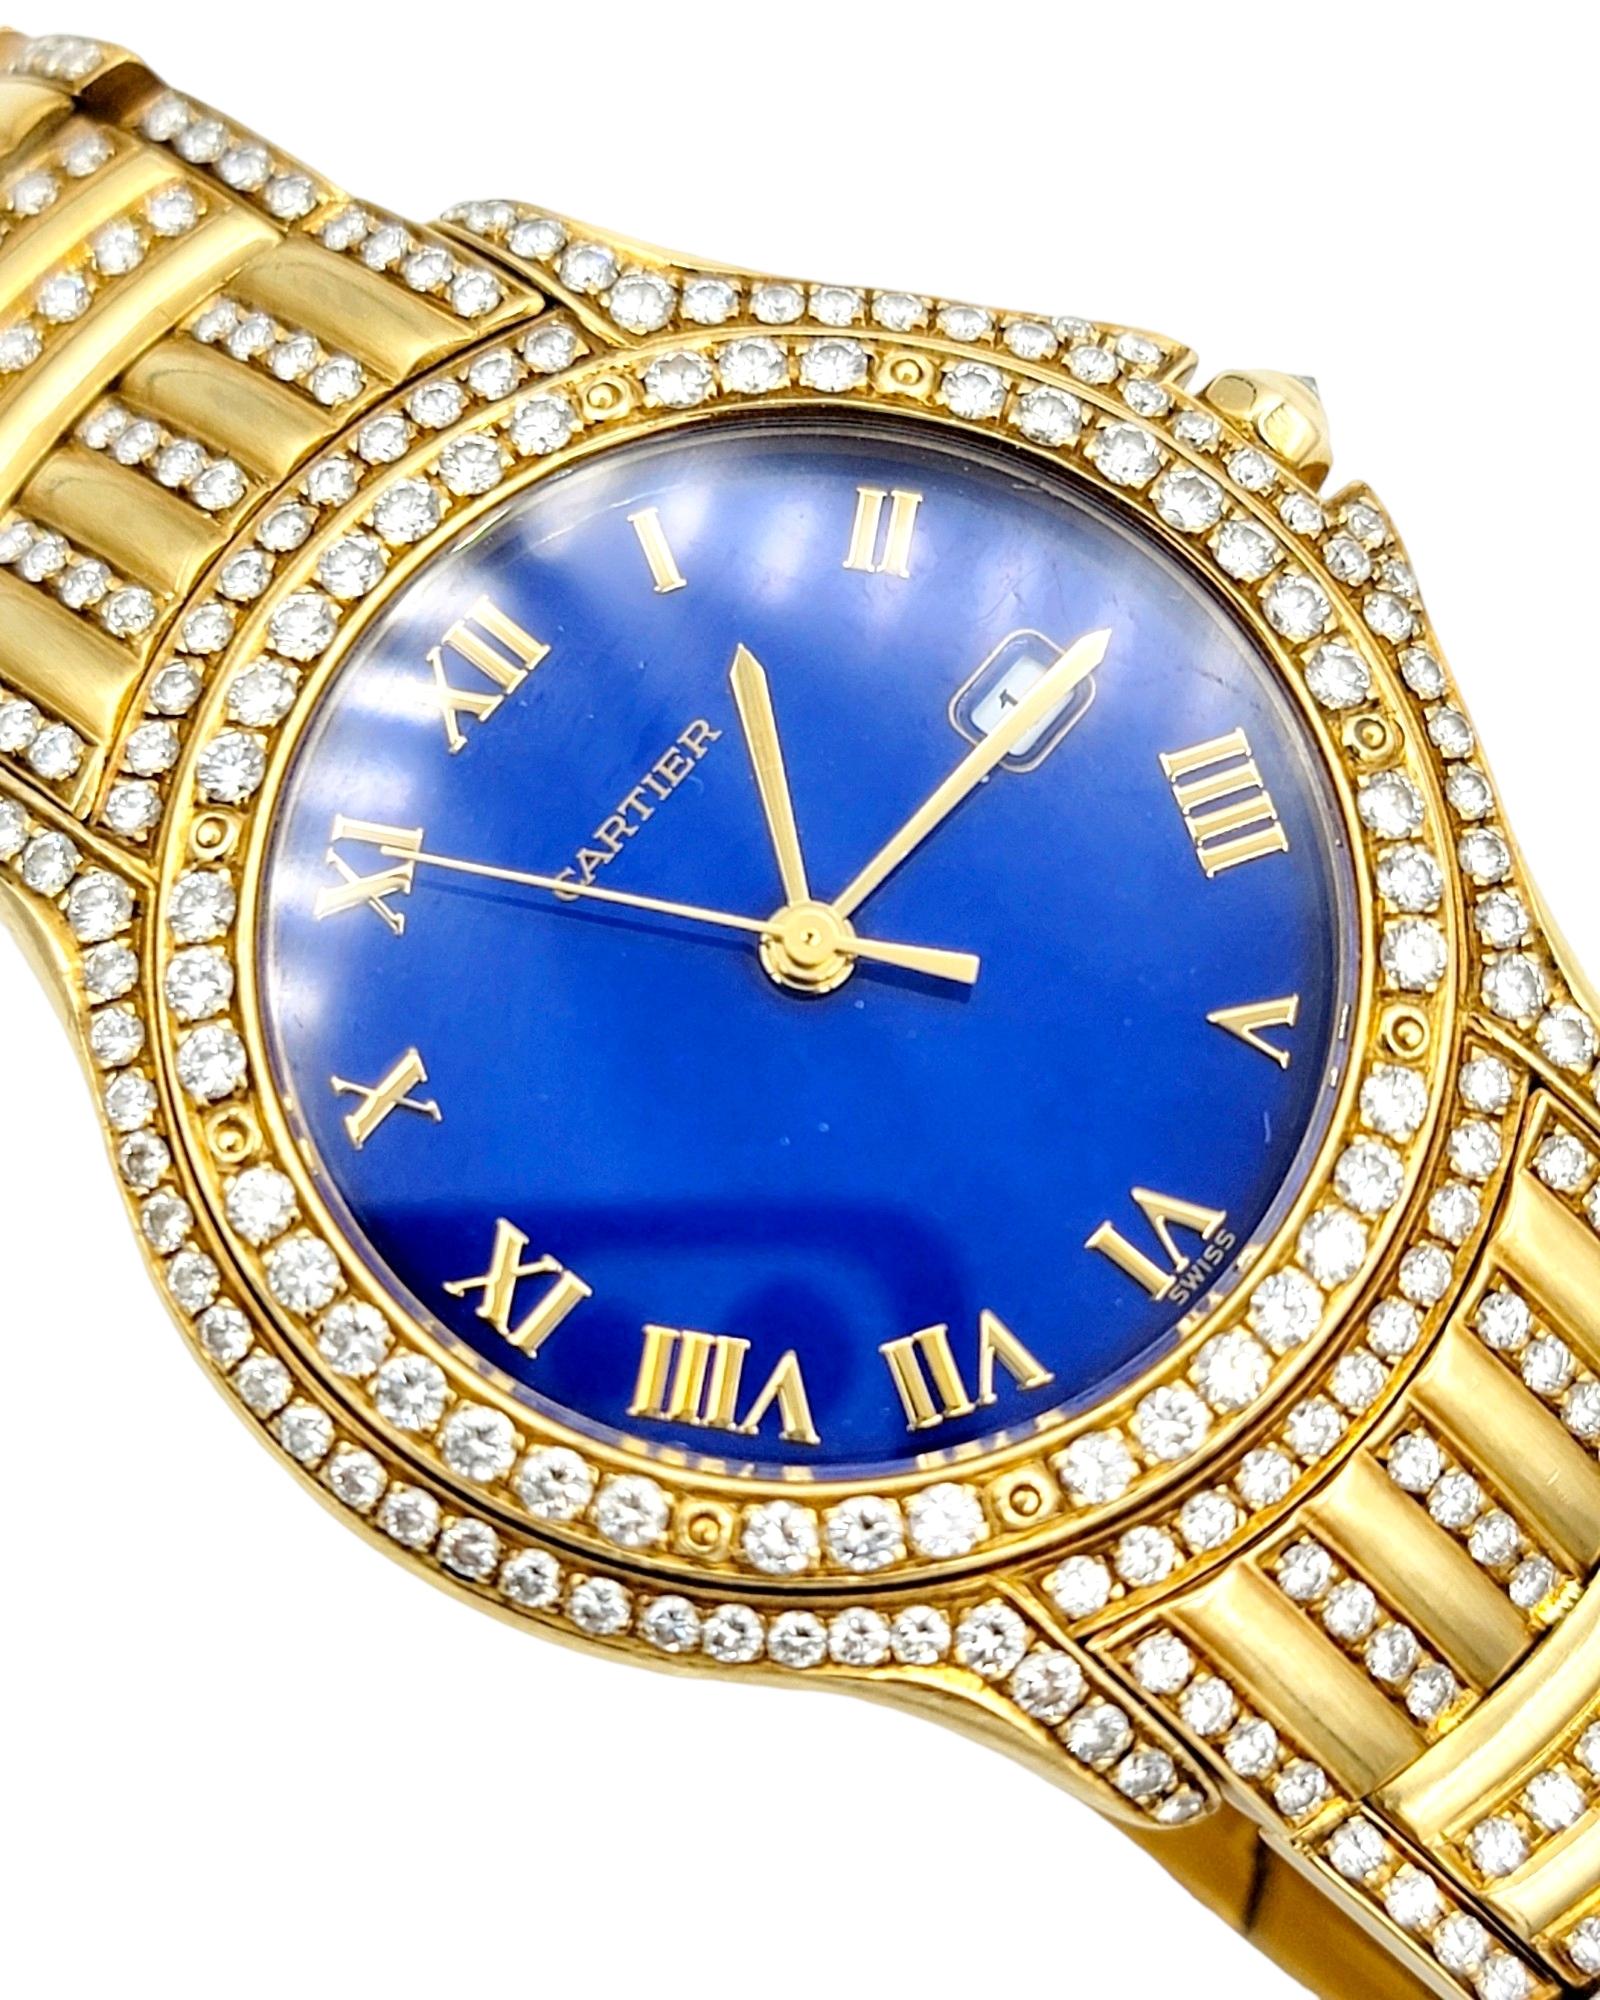 Introducing an exquisite Cartier Panthere Cougar watch, an iconic timepiece that exudes timeless elegance and sophistication. Crafted from lavish 18 karat yellow gold, this unisex watch is a true testament to Cartier's legendary craftsmanship and